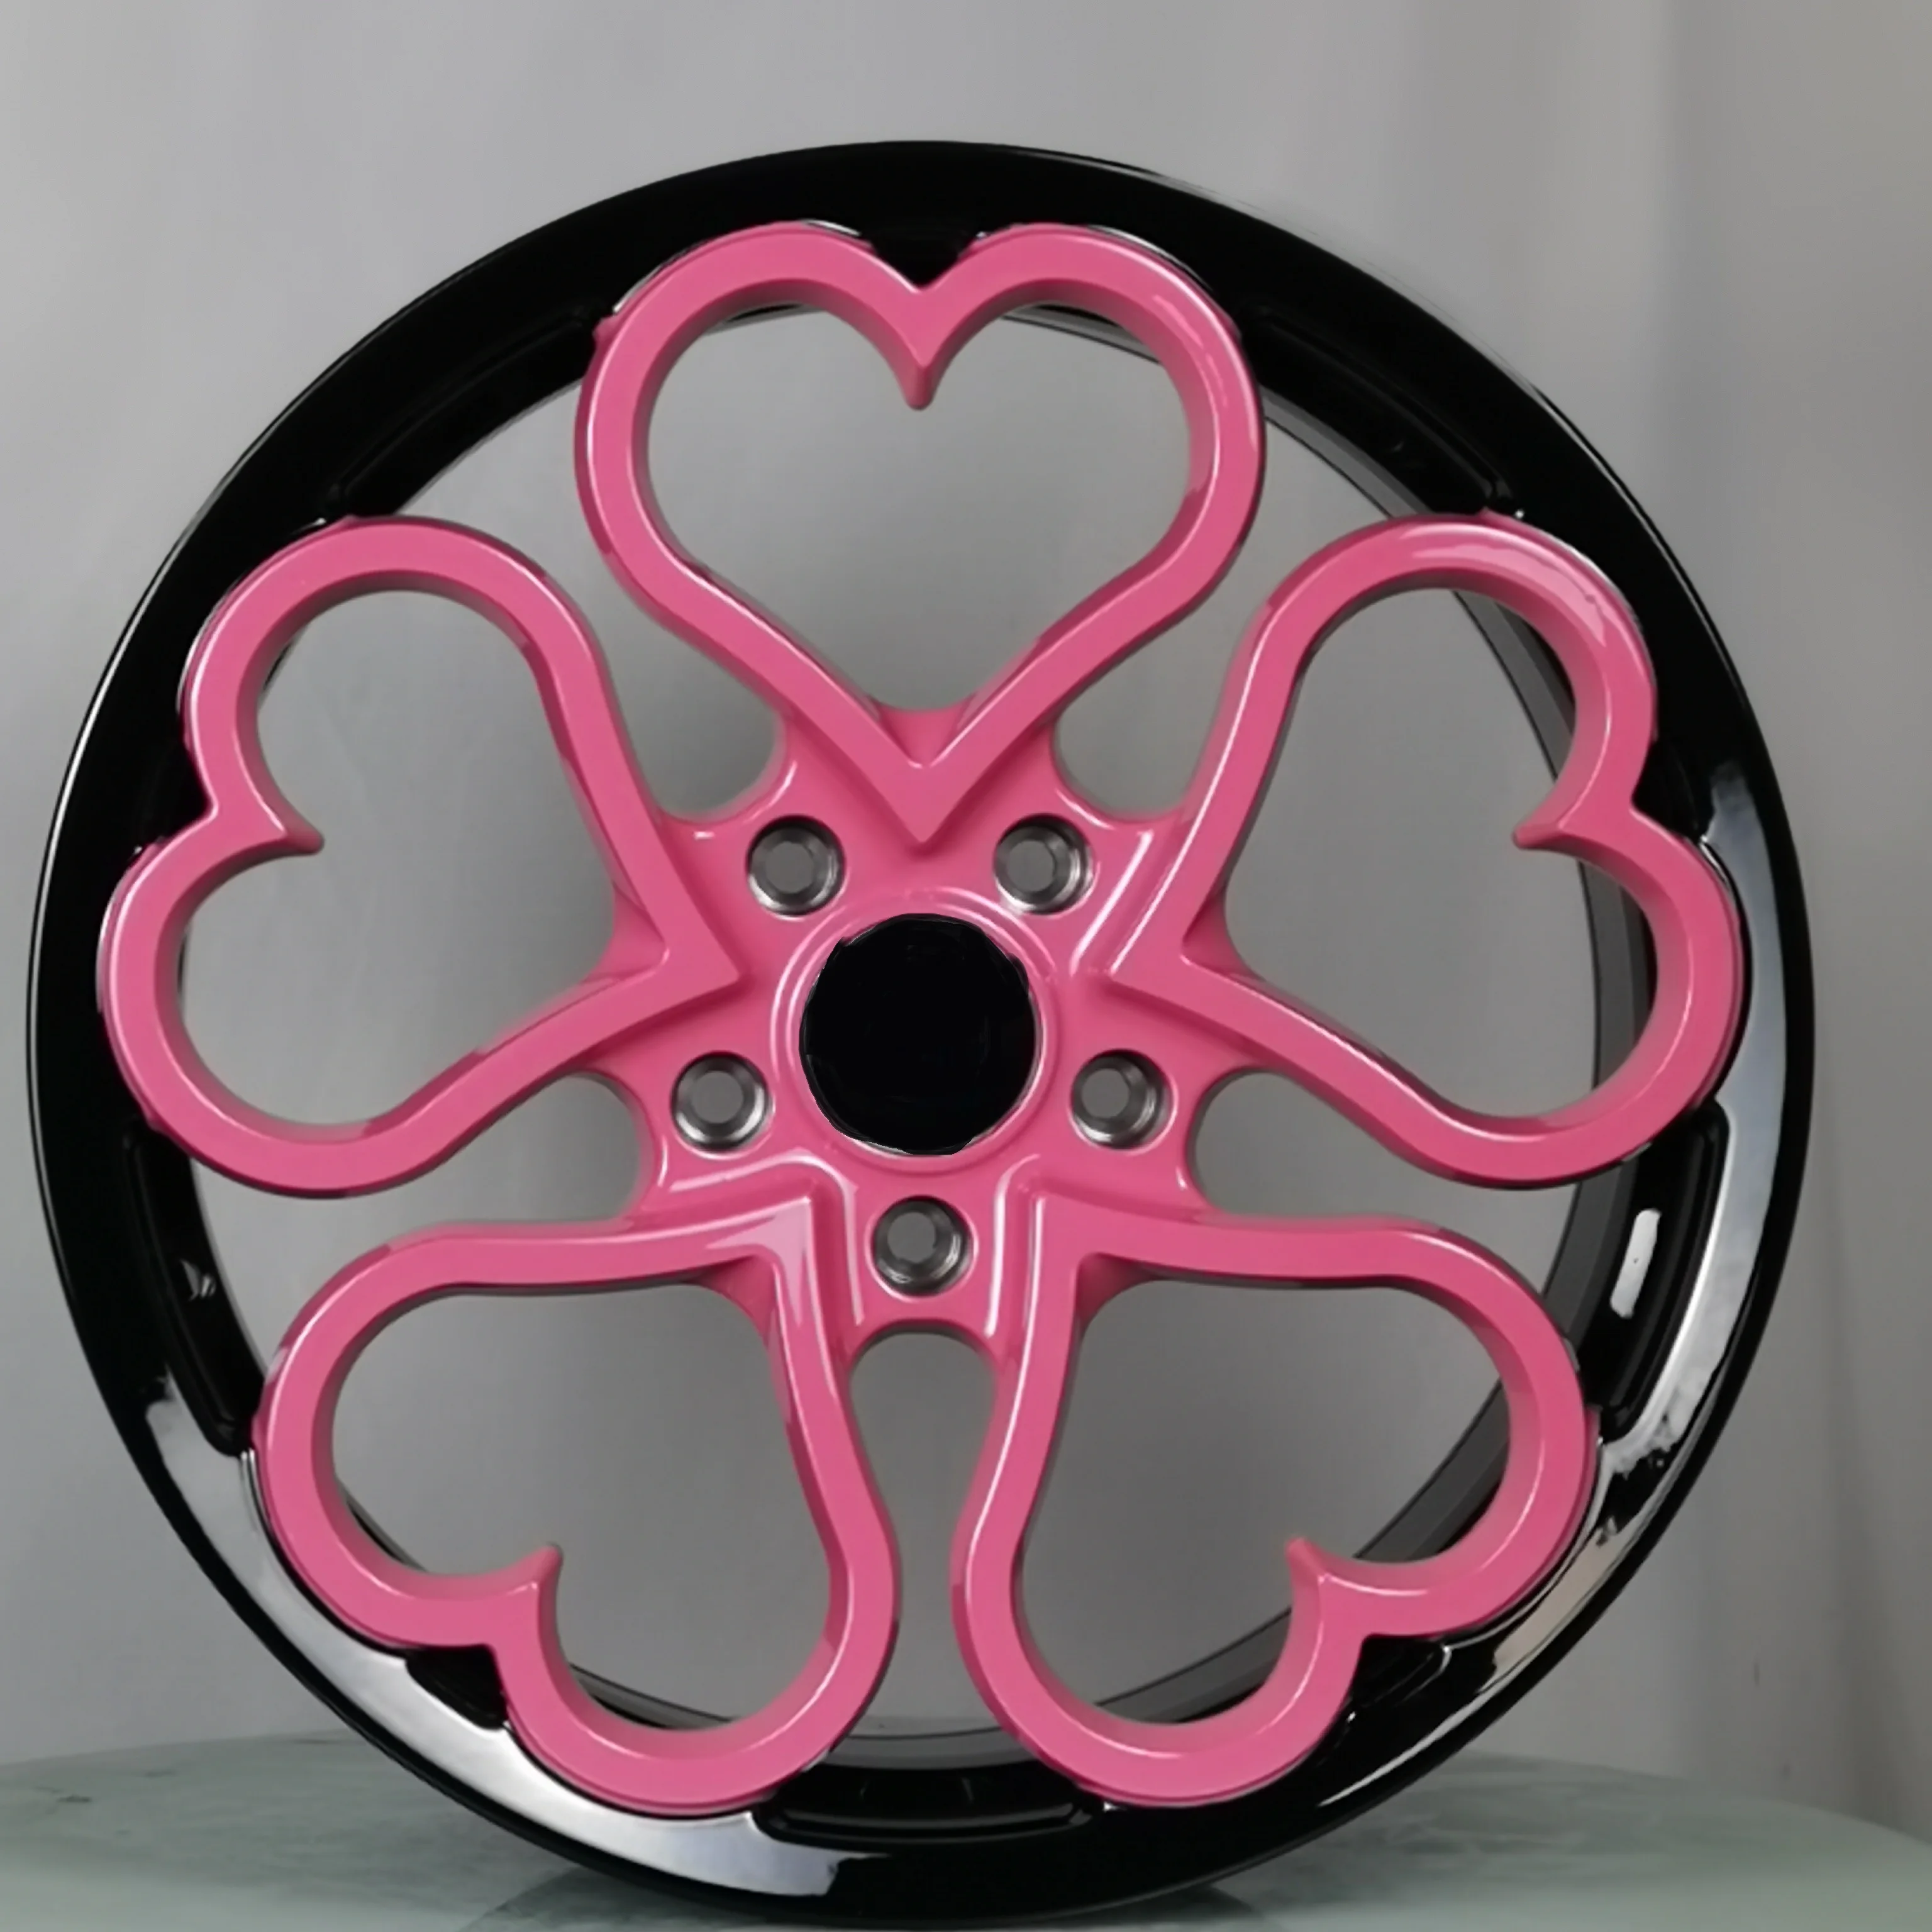 custom forged car alloy wheels rims with hearts 16 17 18 19 inch 5 holes pink rose red small wheel rims 5x112 for bmw